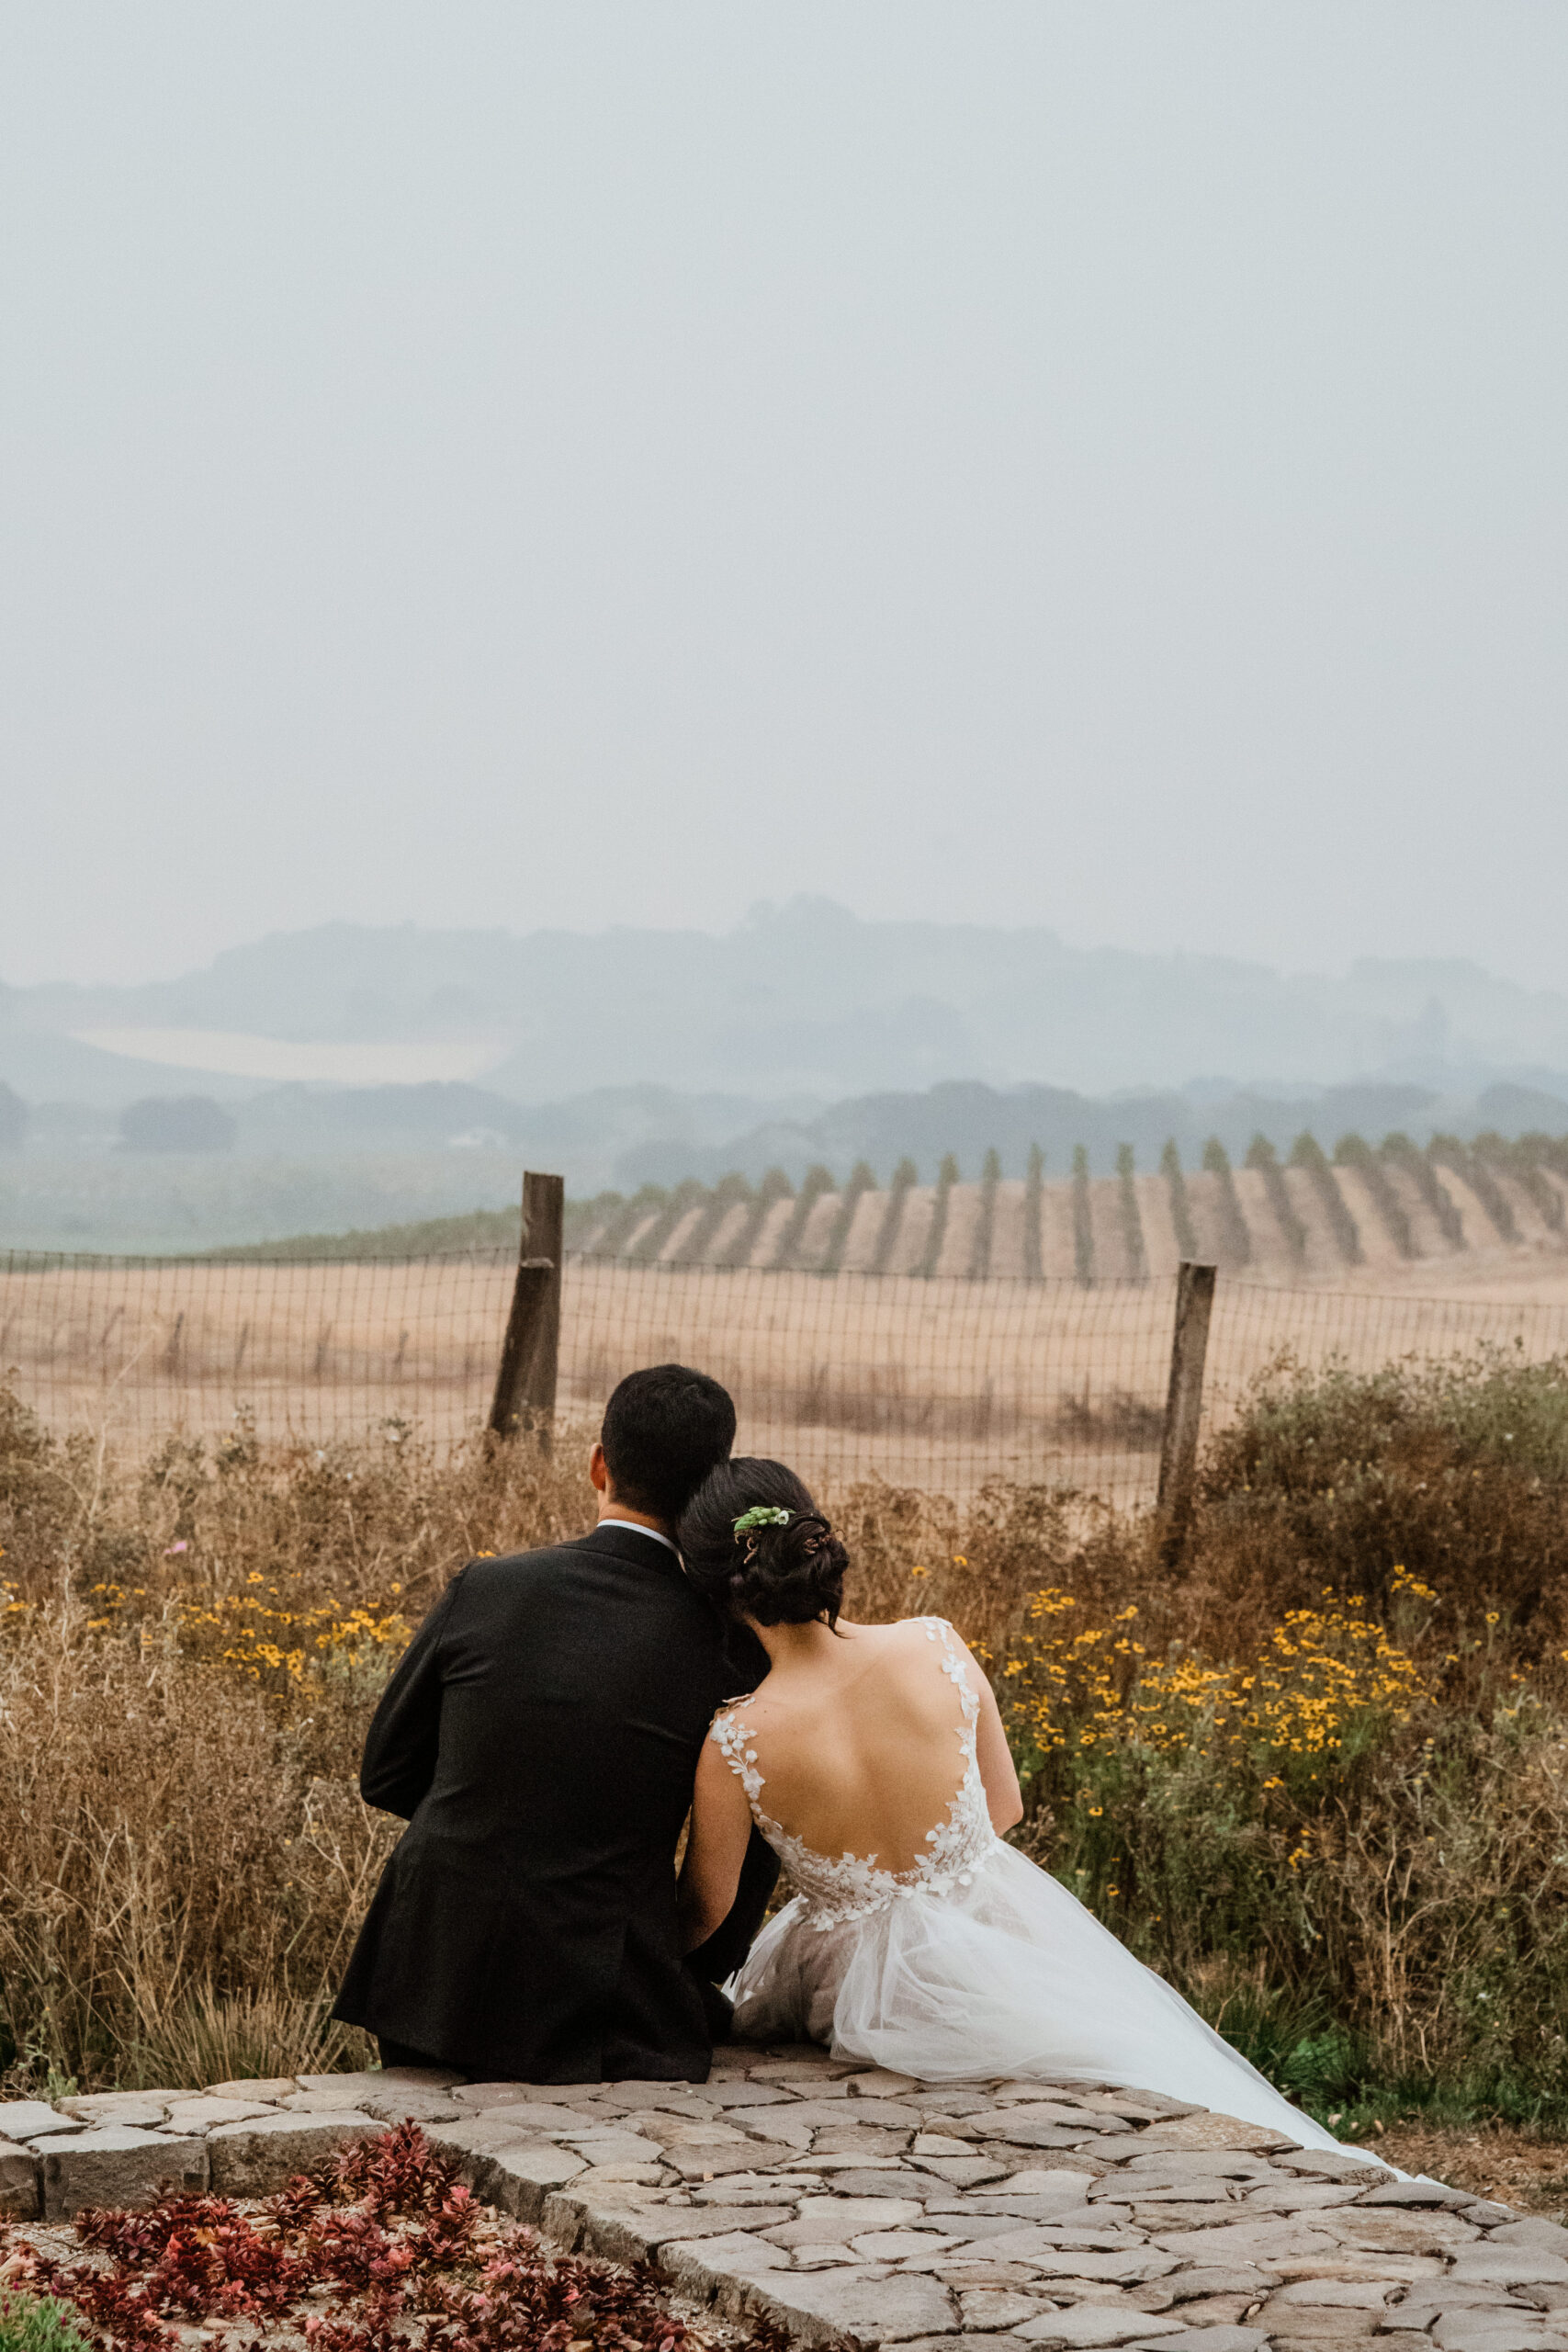 Stunning bride and groom overlook the vineyard rows after their Napa valley wedding